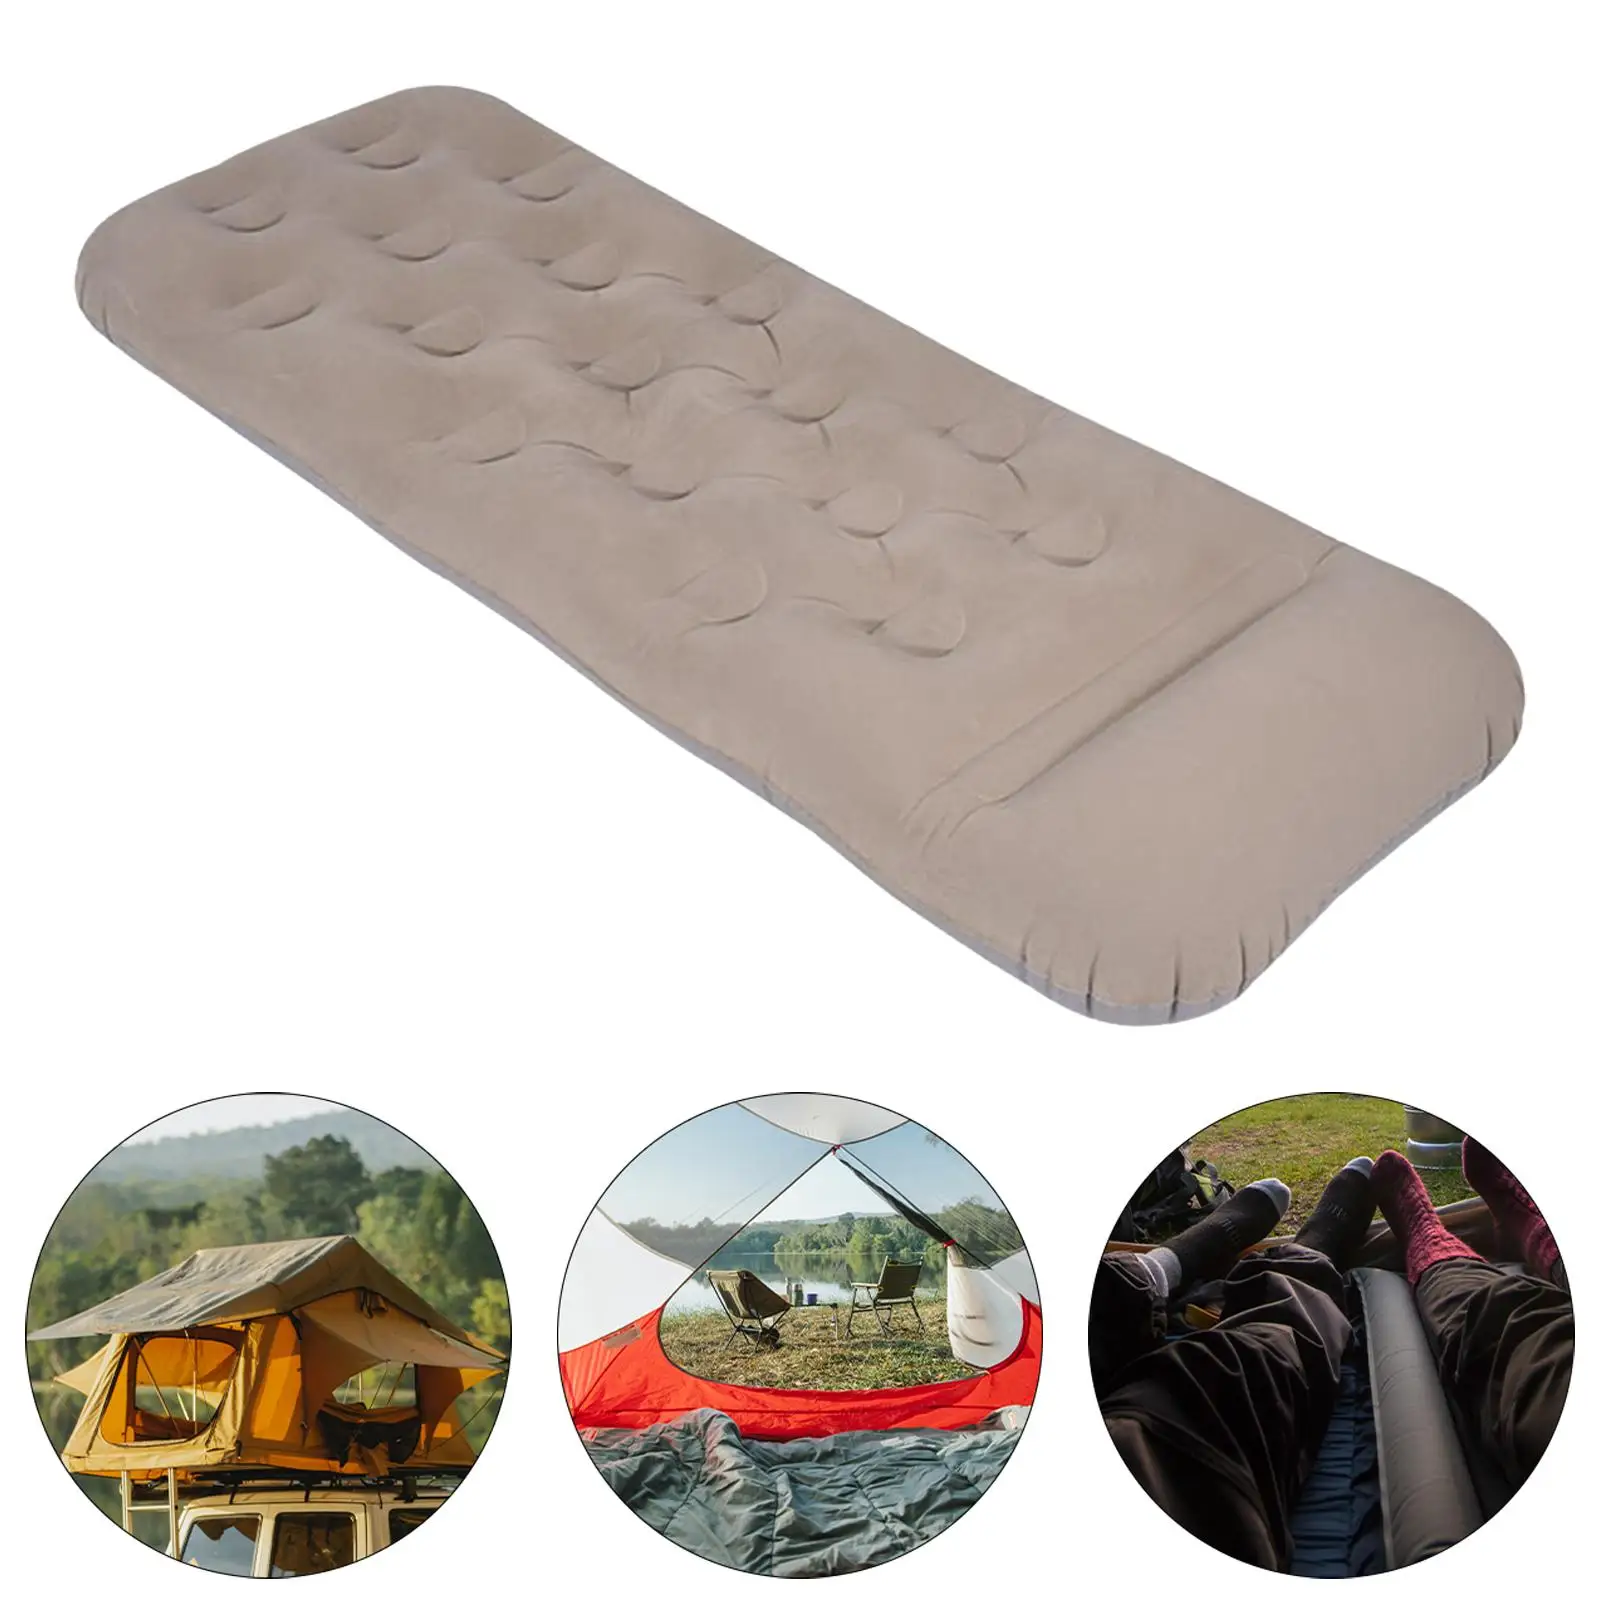 Camping Air Mattress Comfortable Inflatable Mat for Travel Rooftop Tent